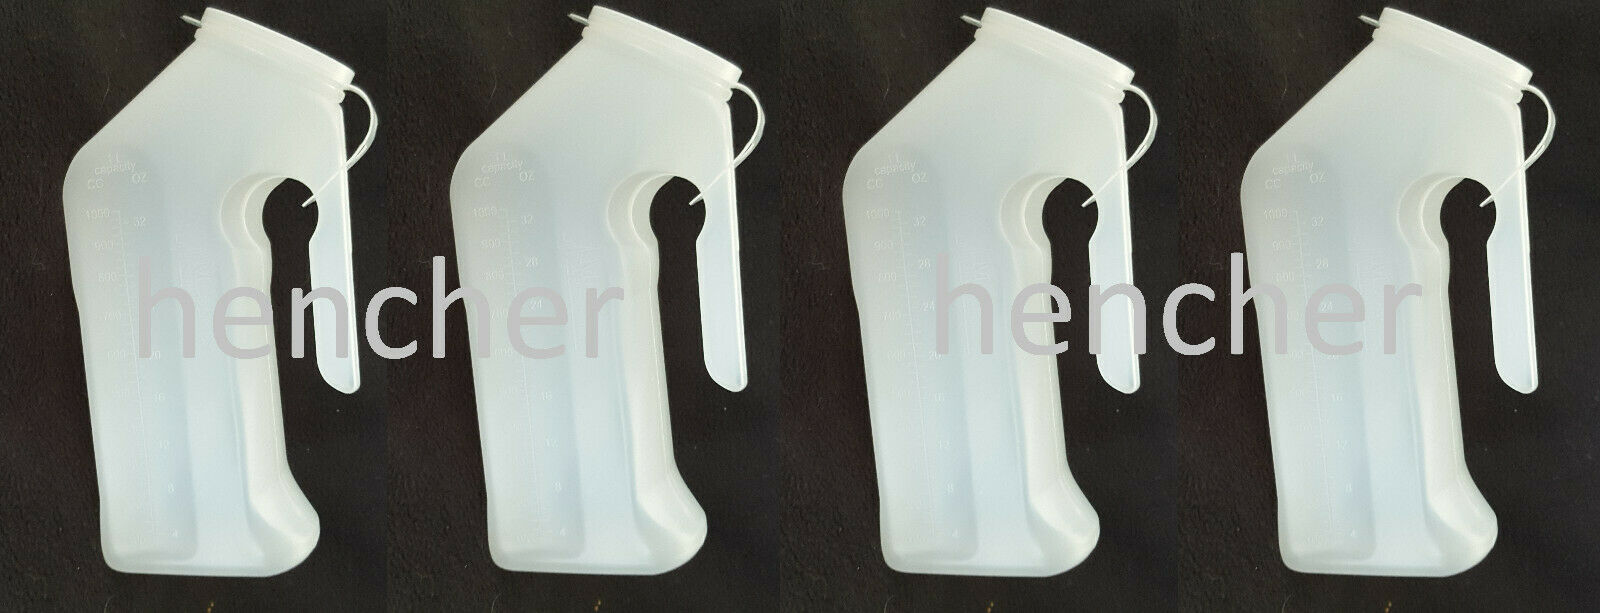 4 Male - Man Urinal Bottle With Cap - Camping Travel Or Road Trip (4) Bottles